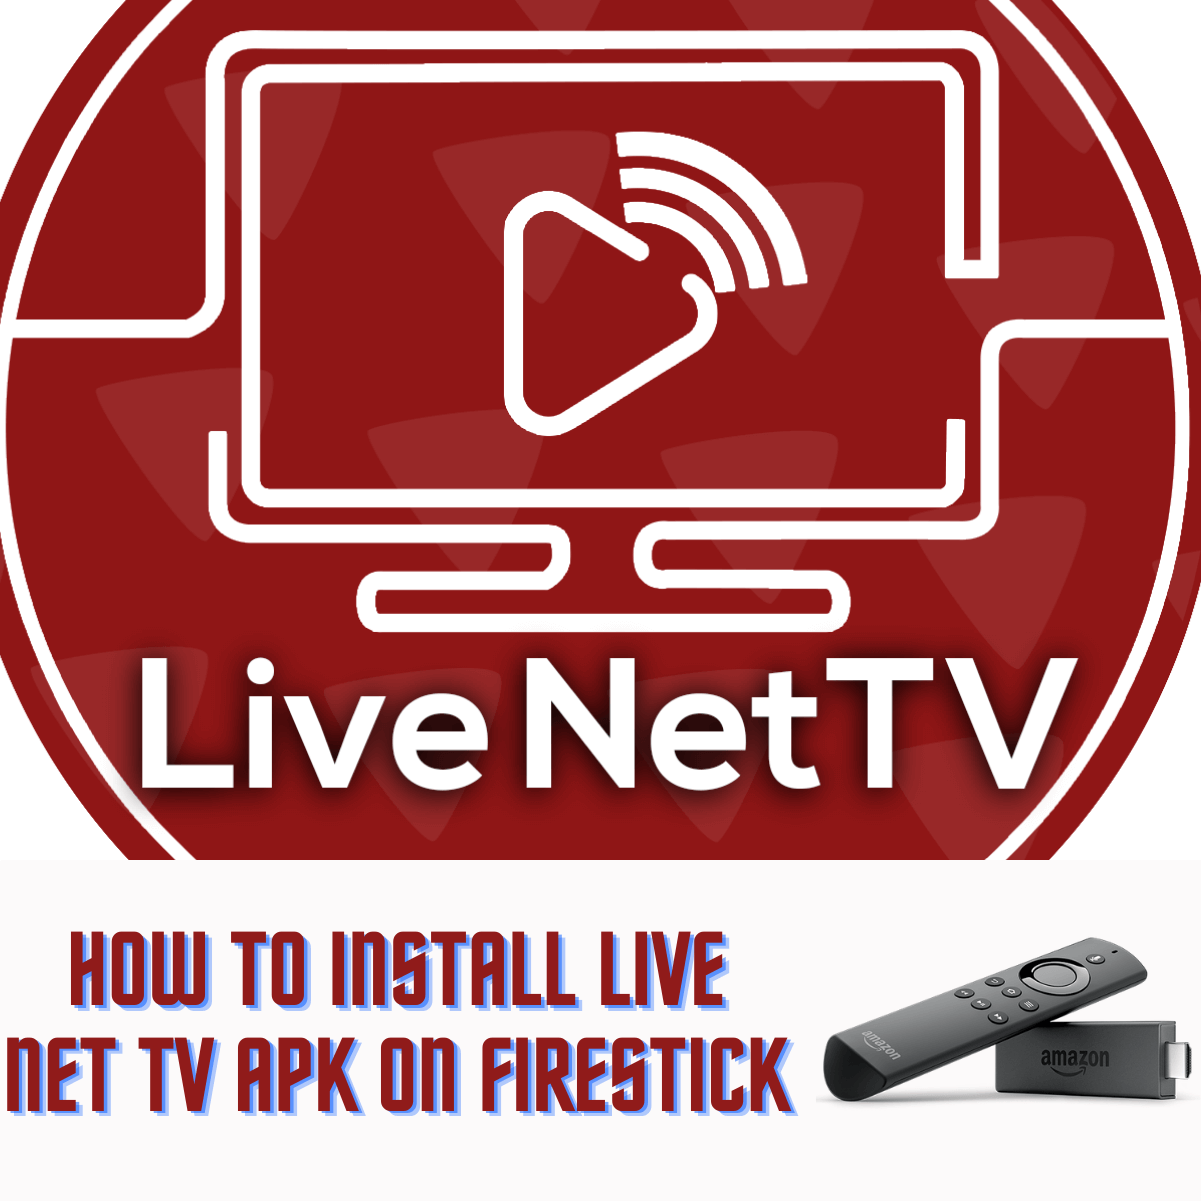 How To Install Live Net Tv Apk On Firestick July 2021 Updated